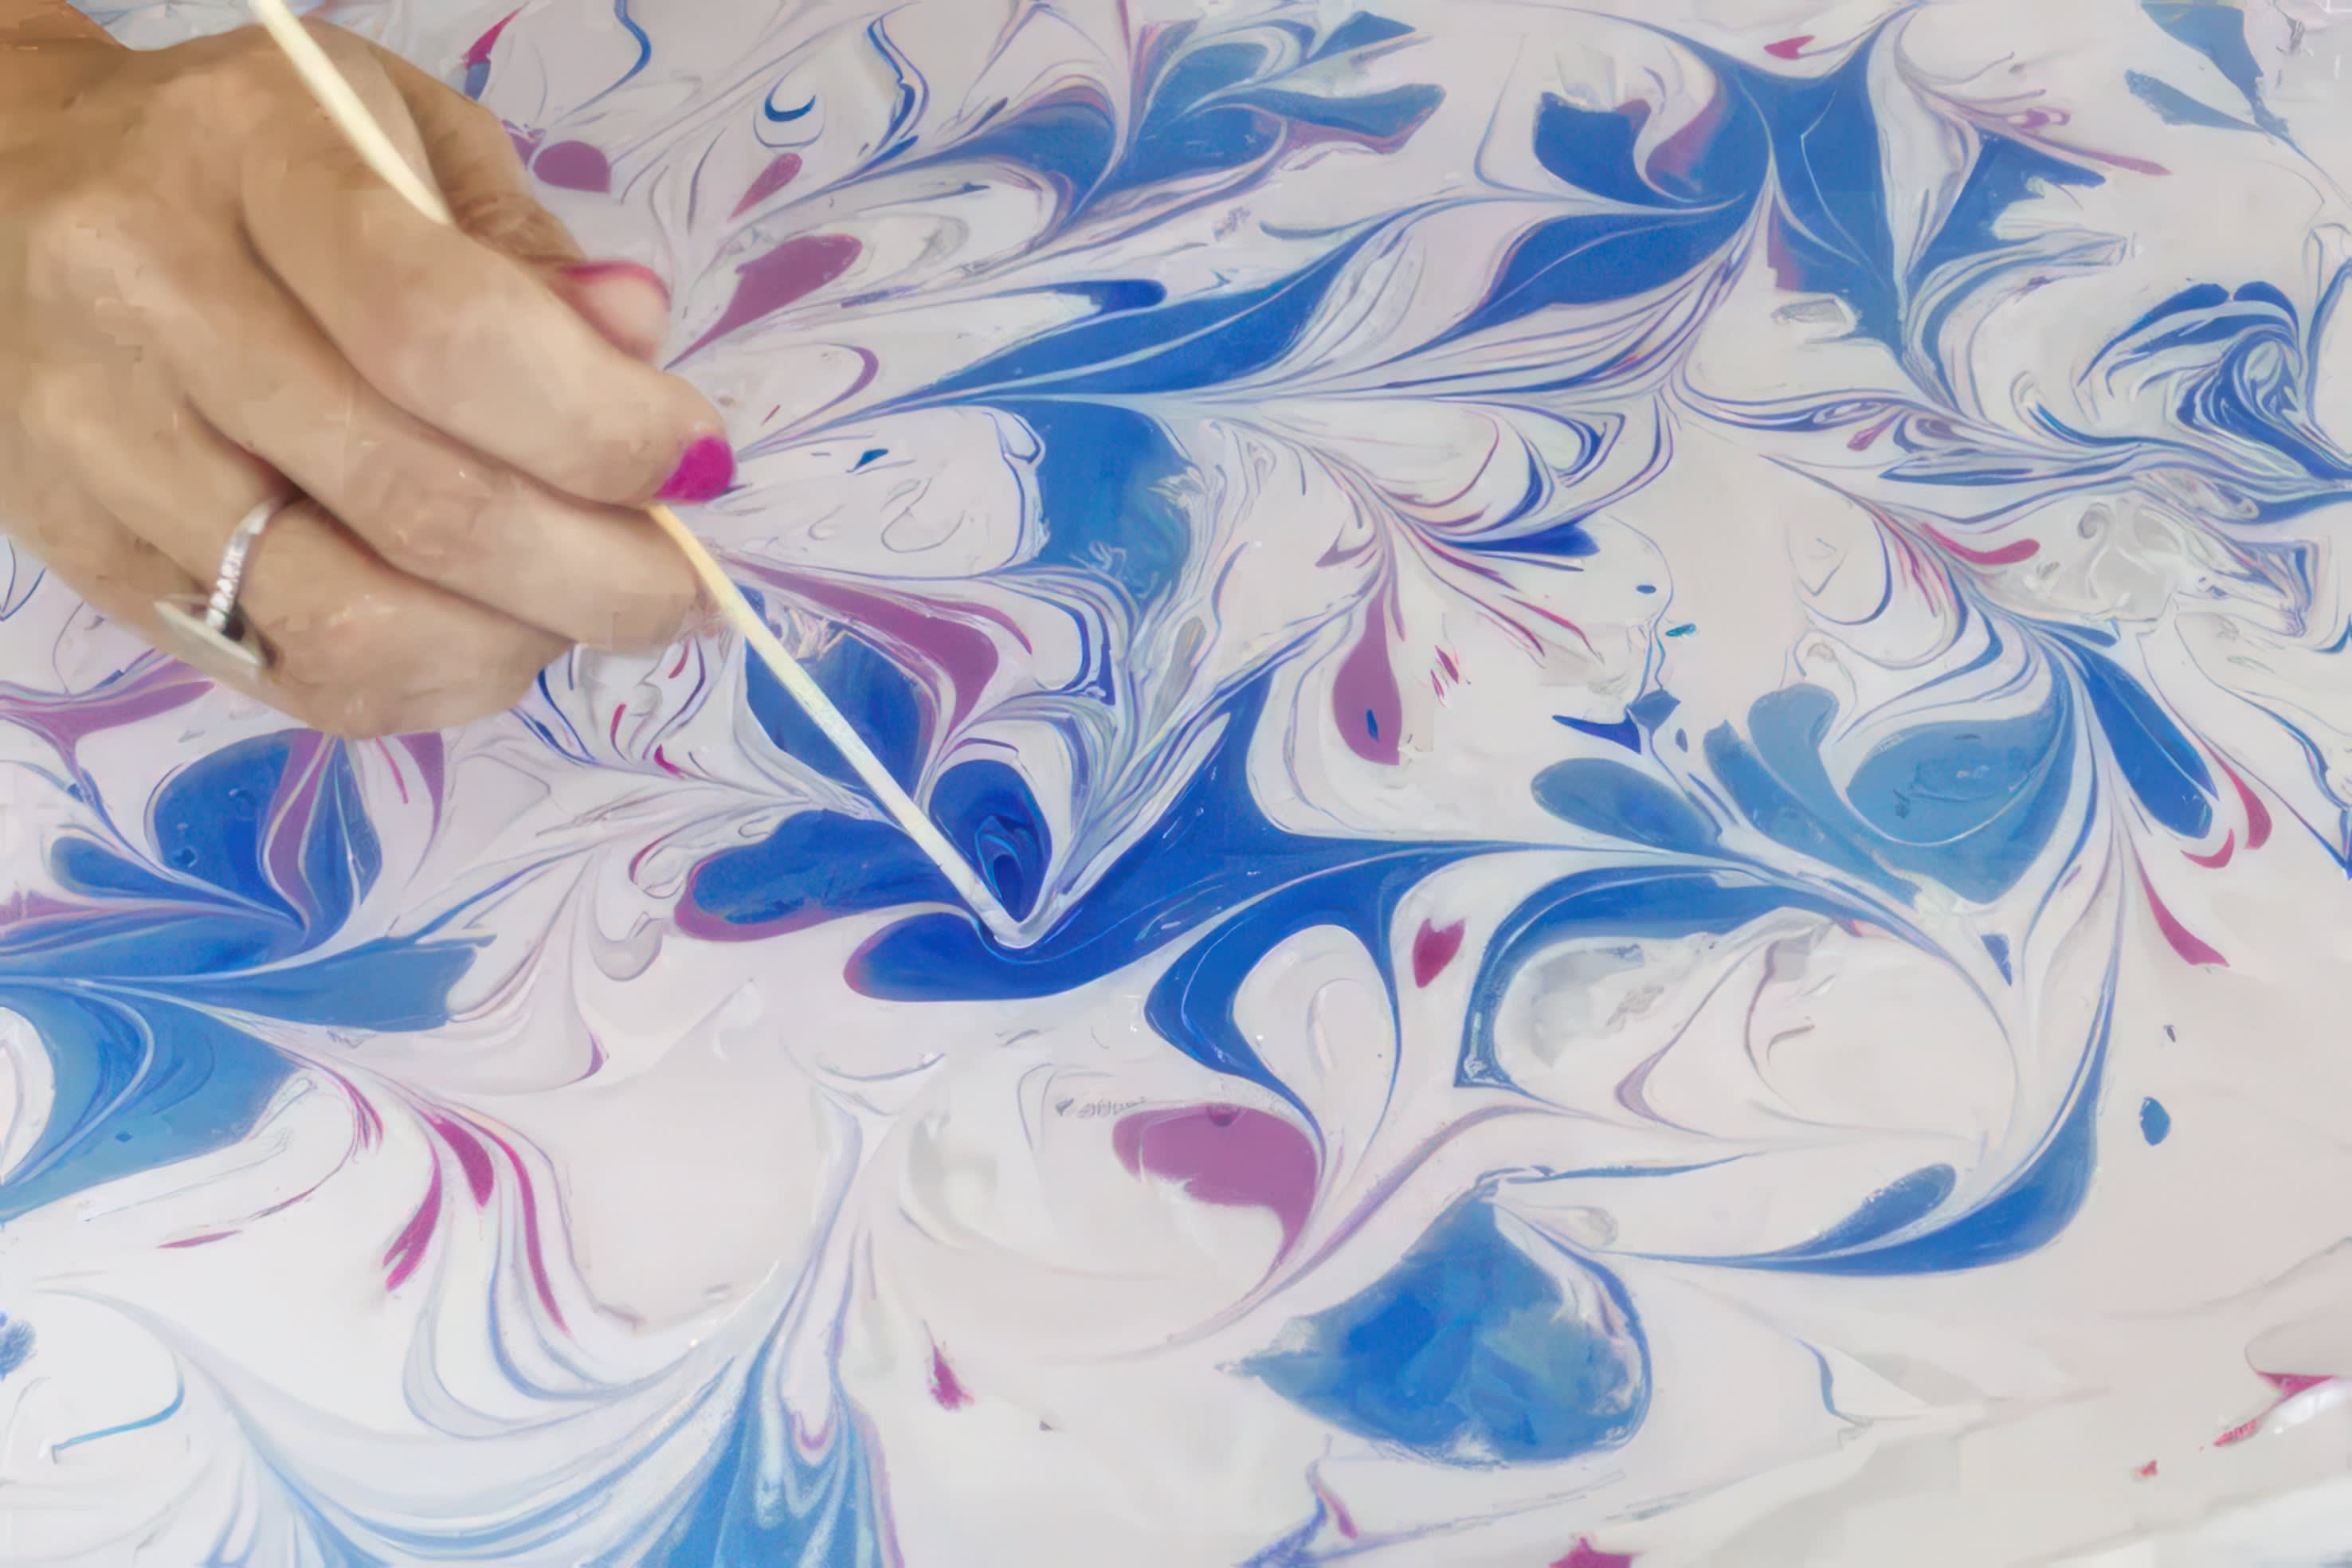 How To Marble Paper With Acrylic Paint. 